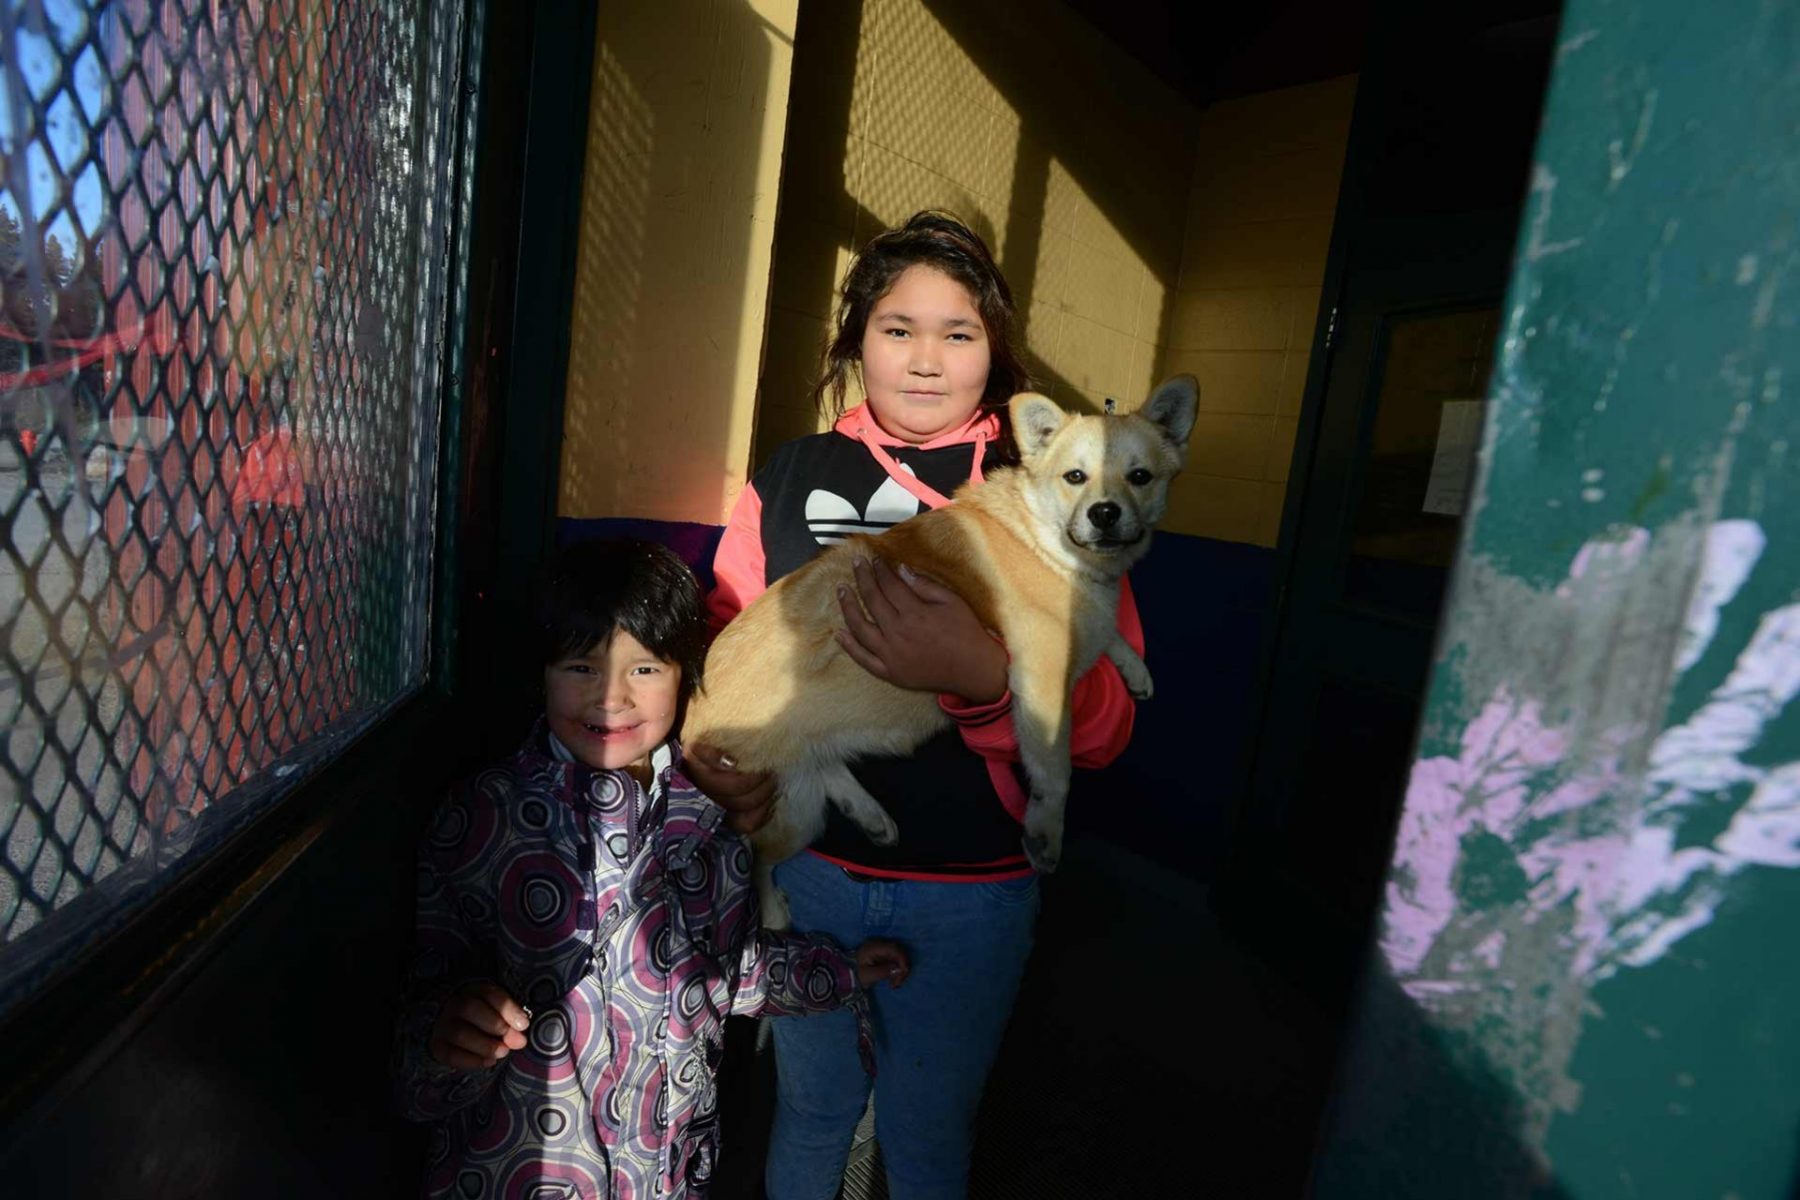 Children in the indigenous community of Opitciwan in northern Quebec help round up street dogs and family pets for the spay and neuter clinic hosted by Chiots Nordiques. Canada, 2014. JMcArthur / Humane Society International